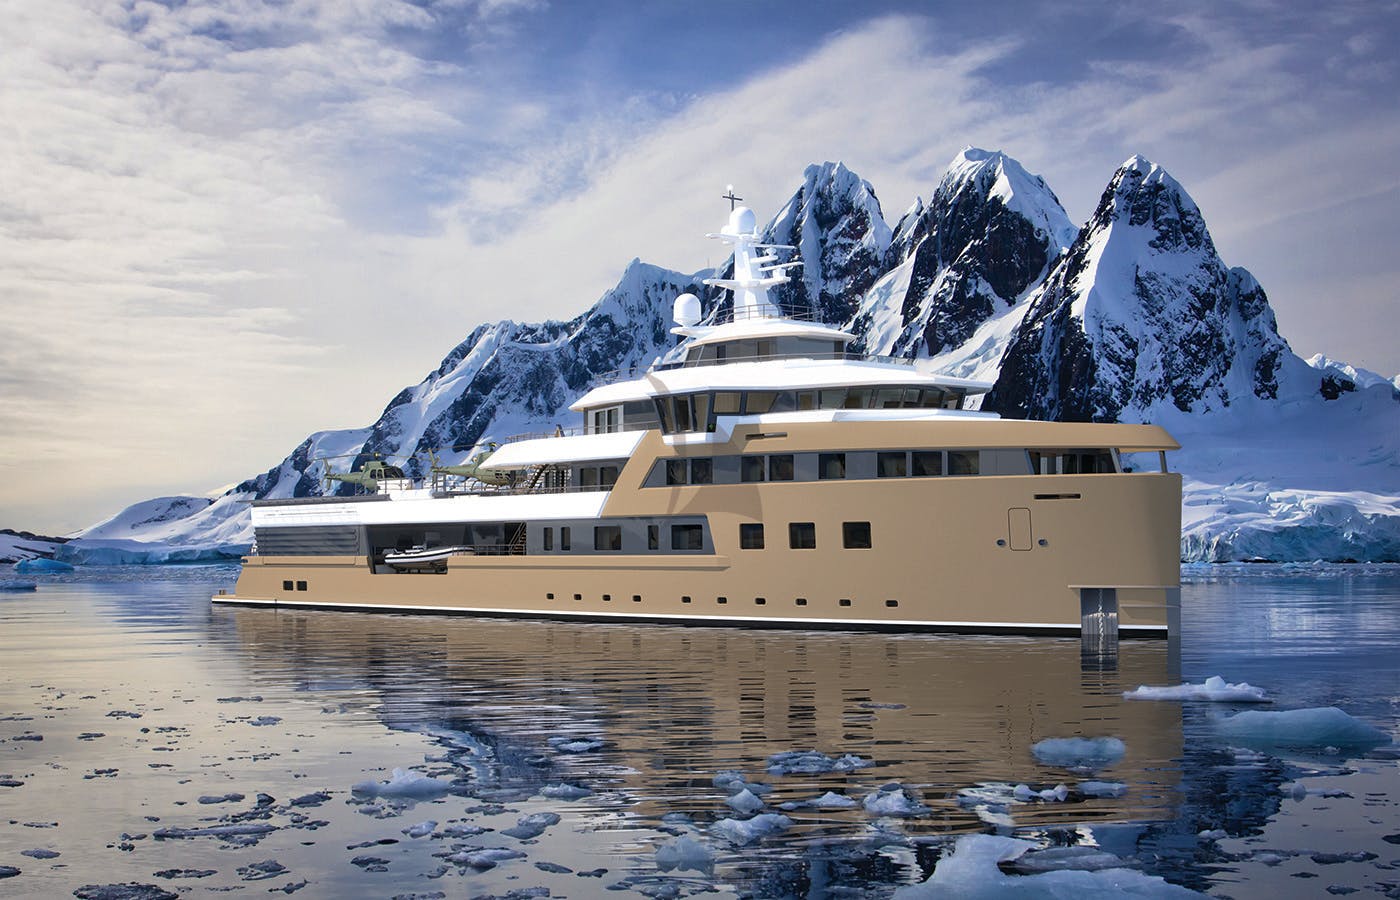 Tendar & Toys for LA DATCHA Private Luxury Yacht For charter